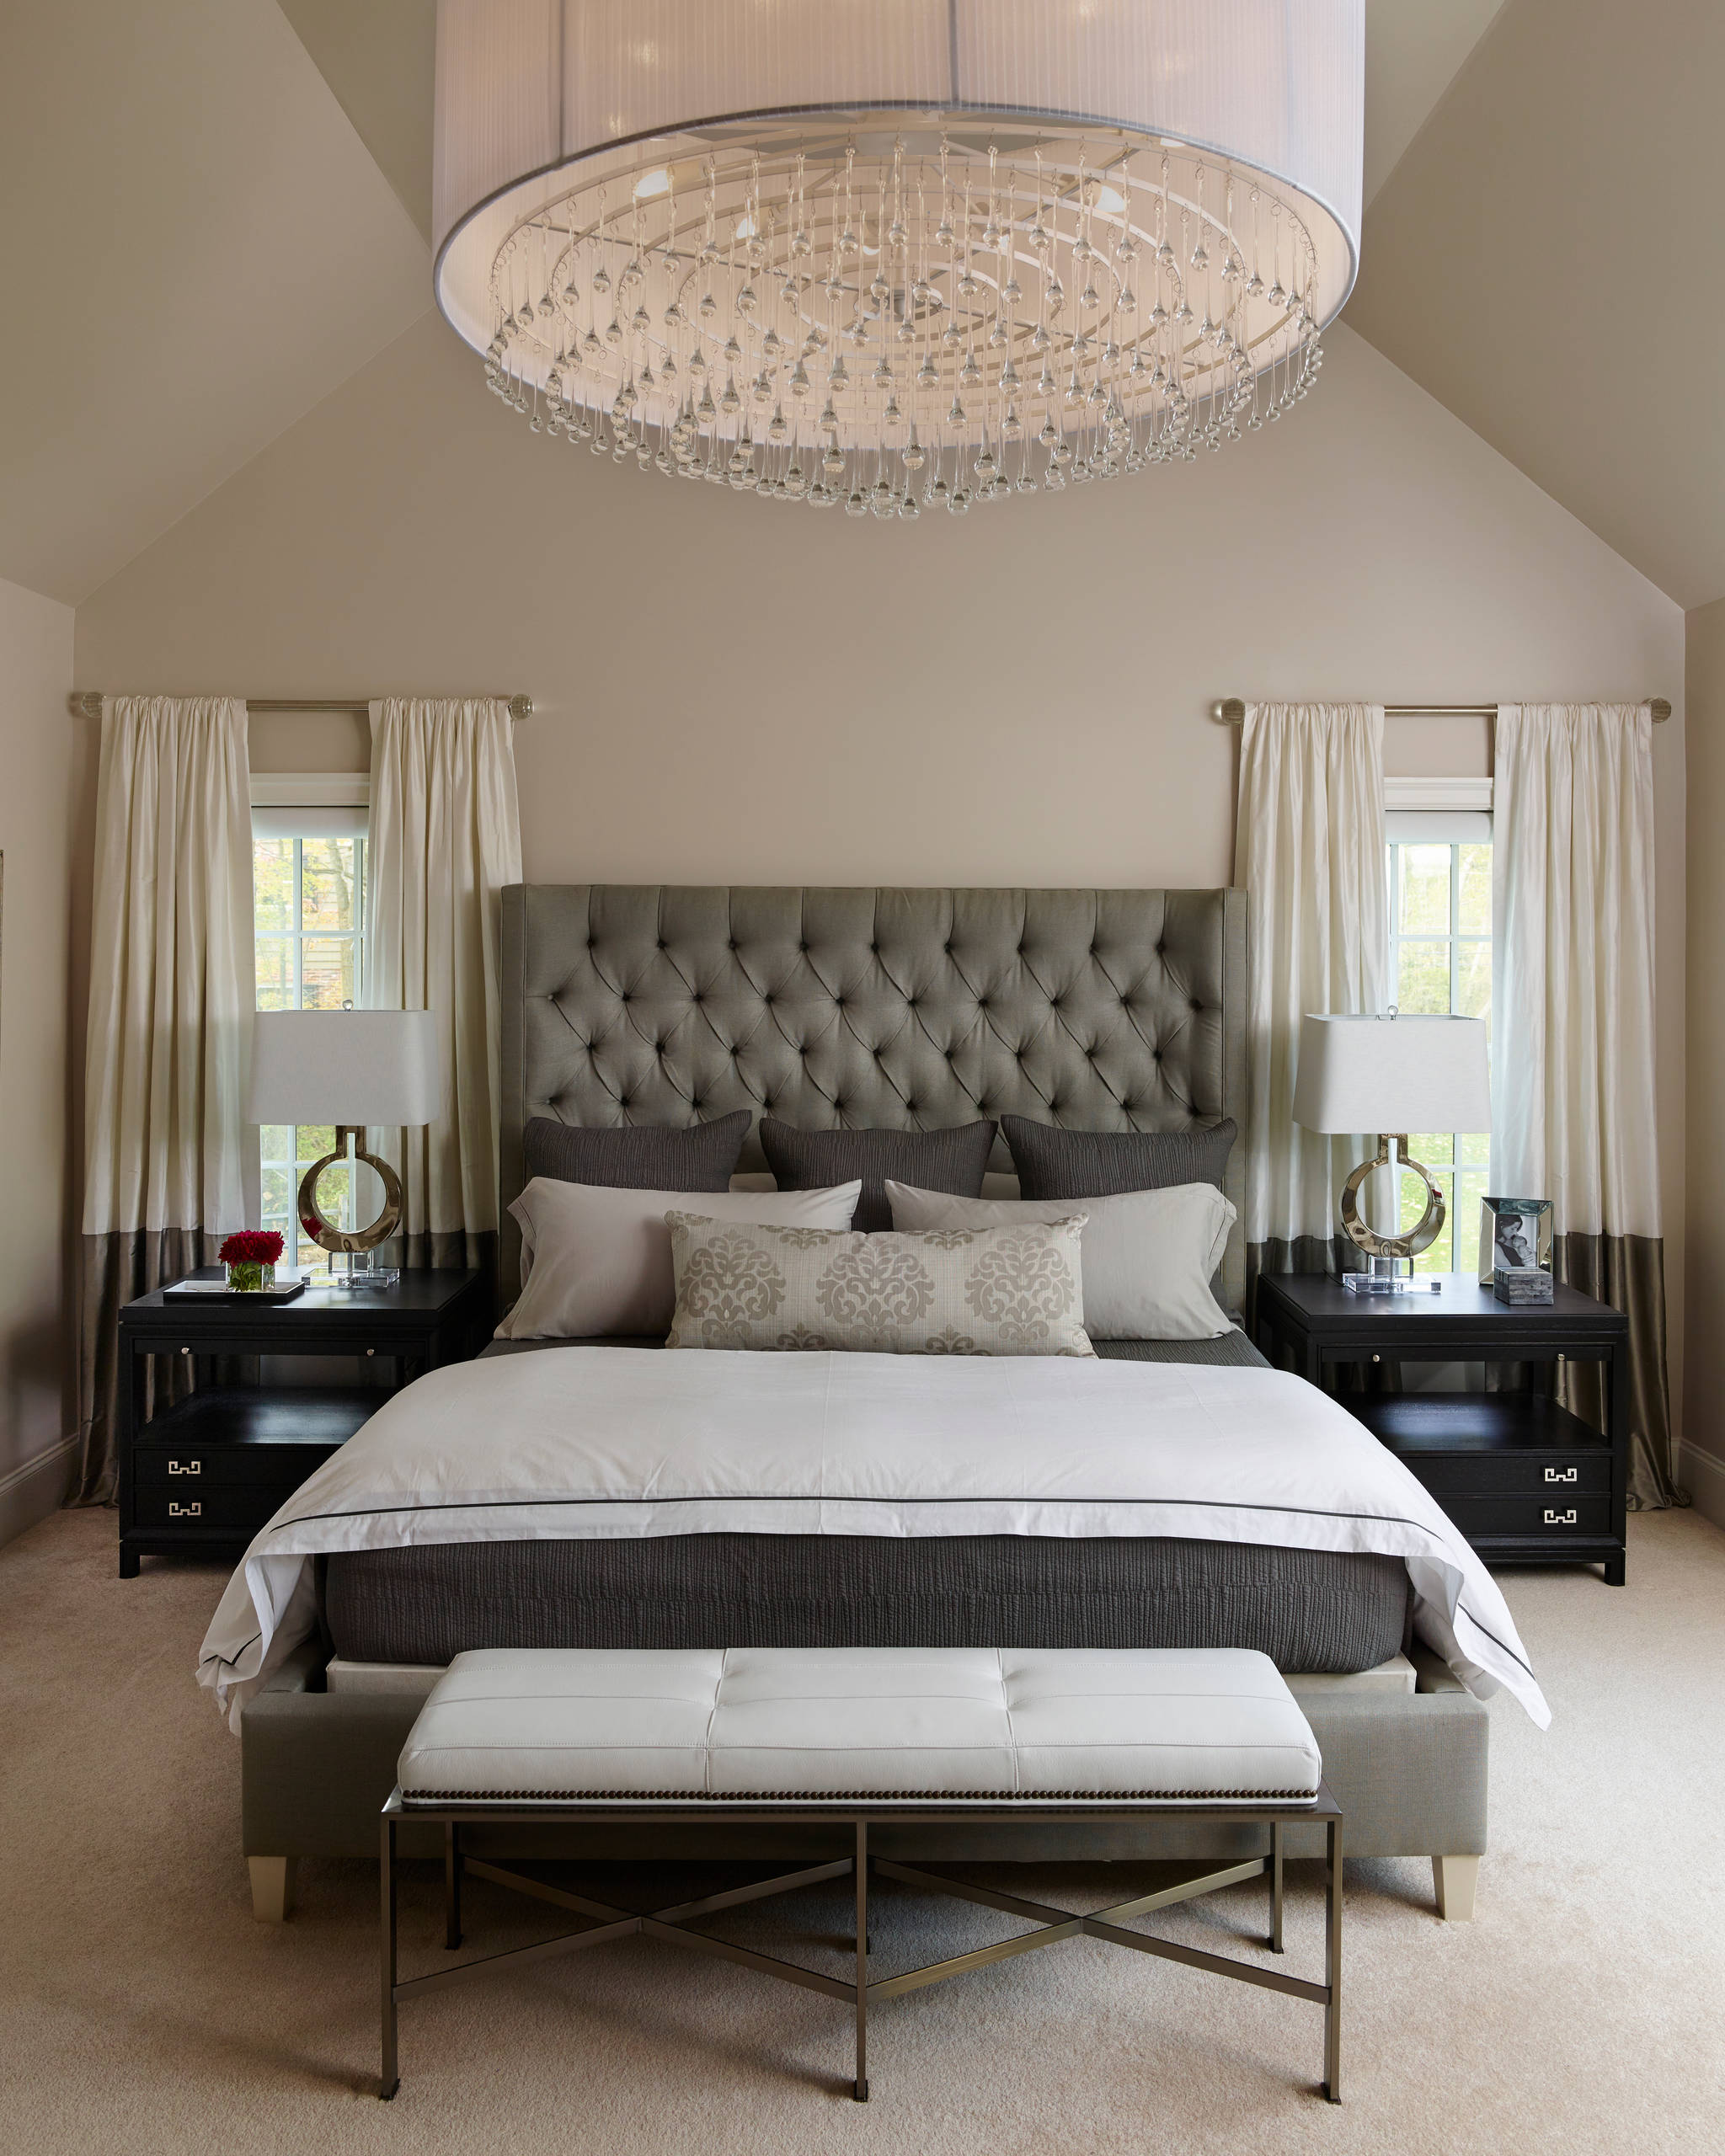 75 Beautiful Bedroom With Beige Walls Pictures Ideas March 2021 Houzz